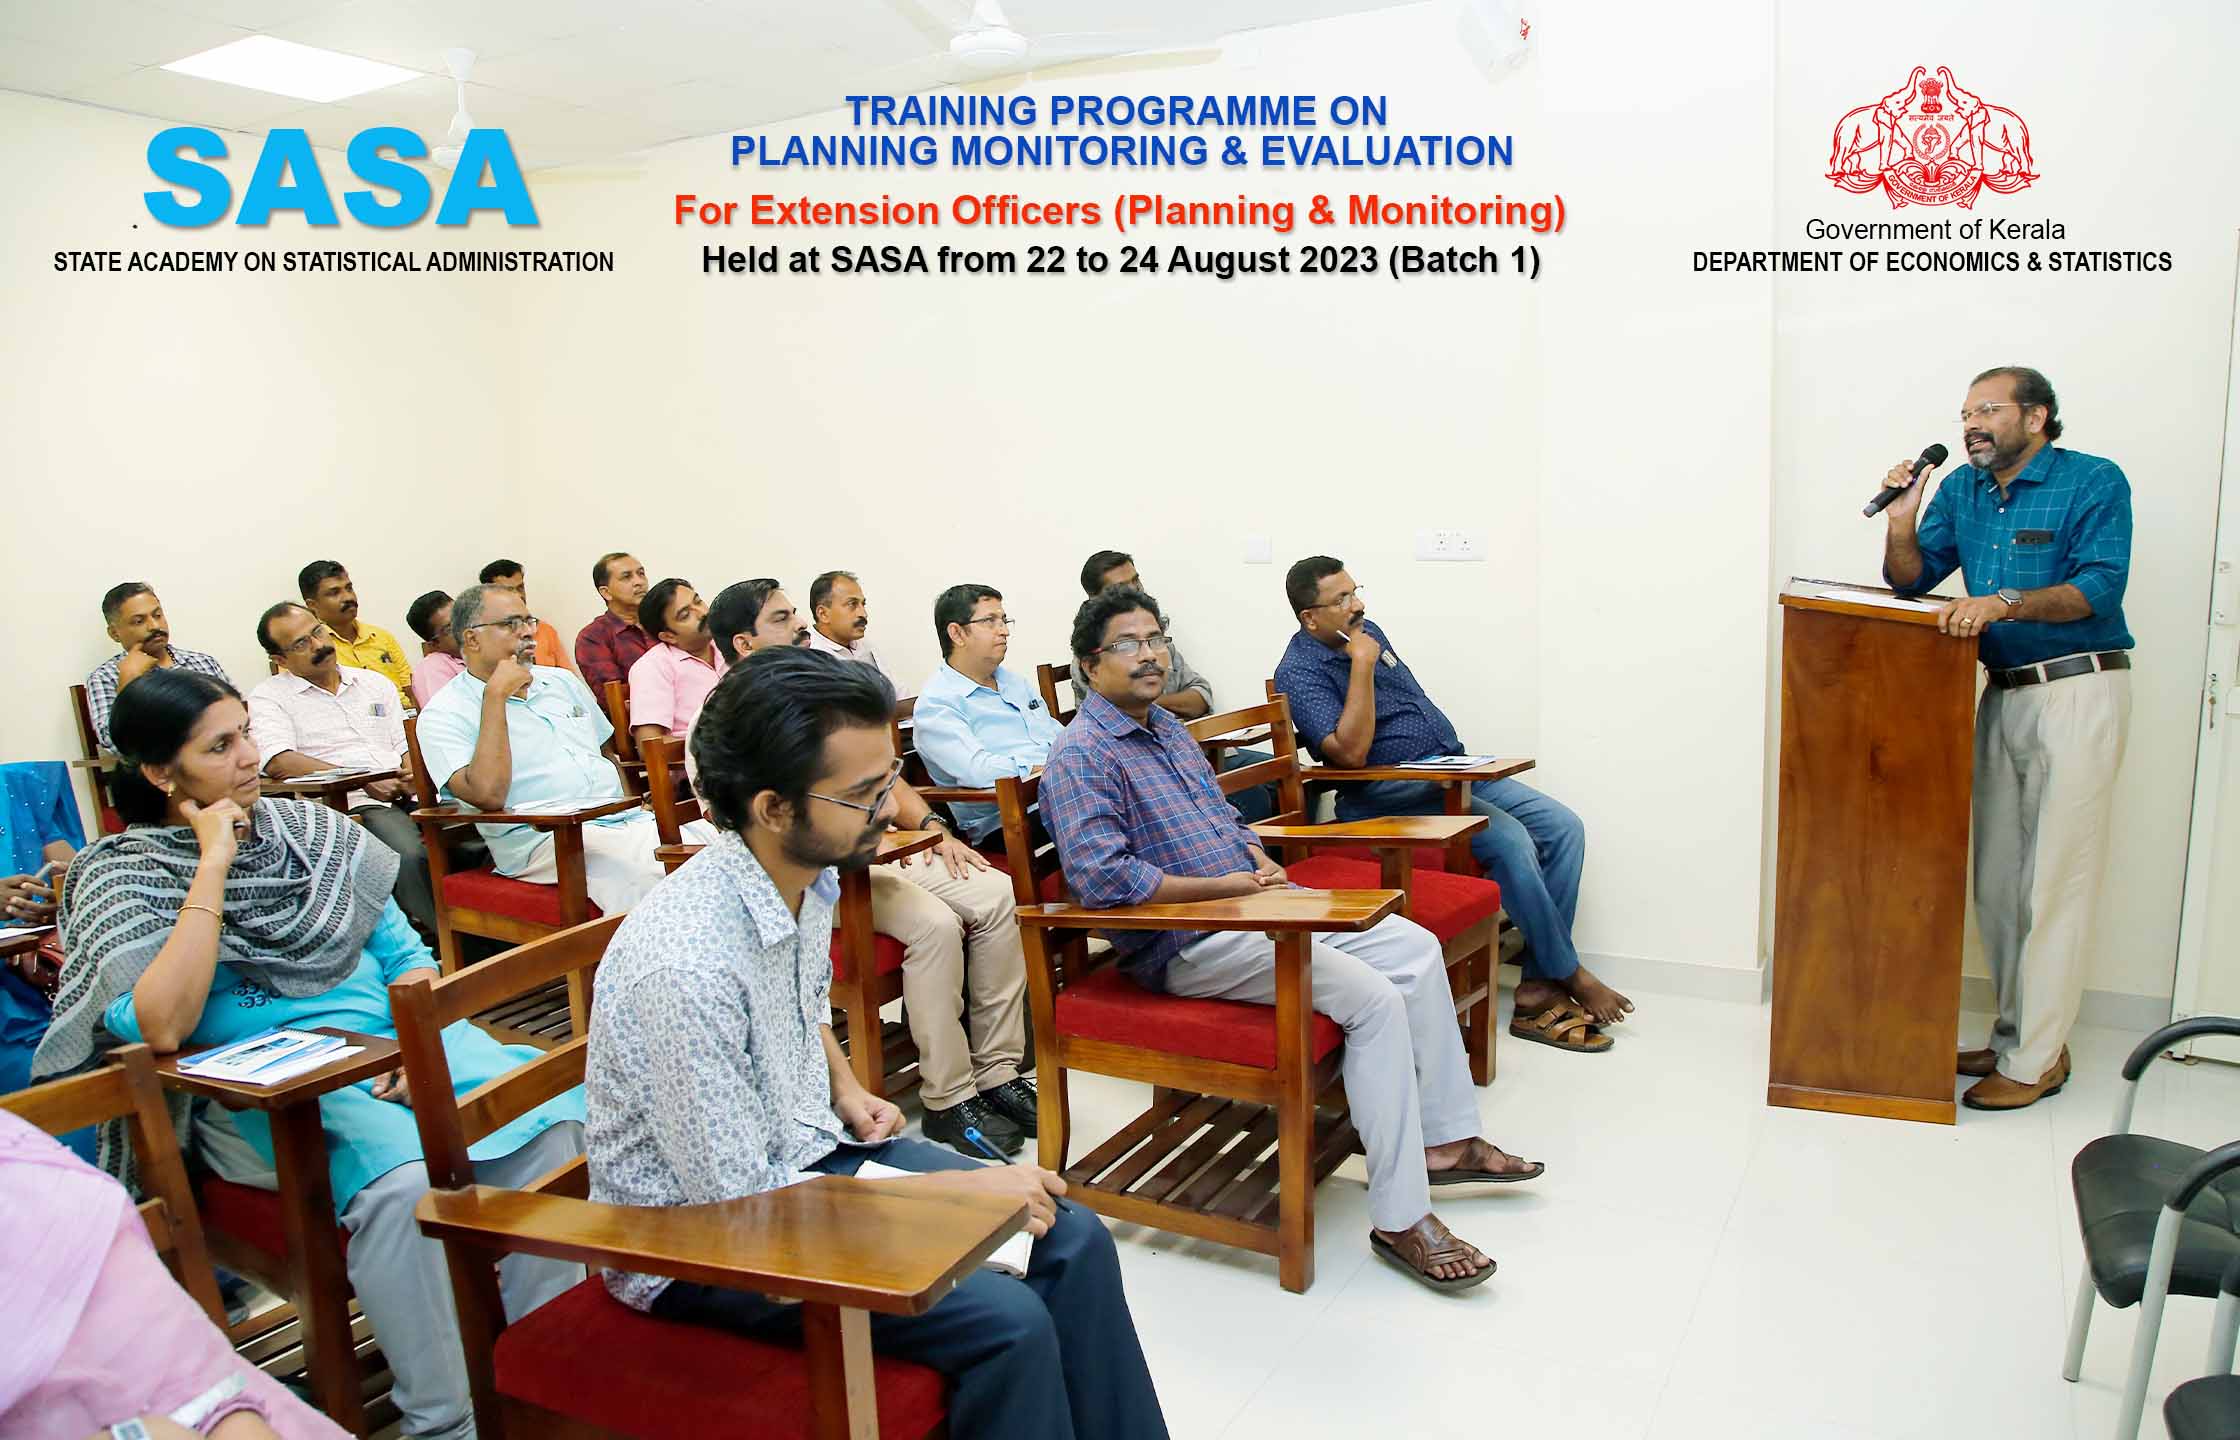 Training on Planning Monitoring & Evaluation to EO (P&M) Batch 1 held at SASA from 22-24 Aug 2023